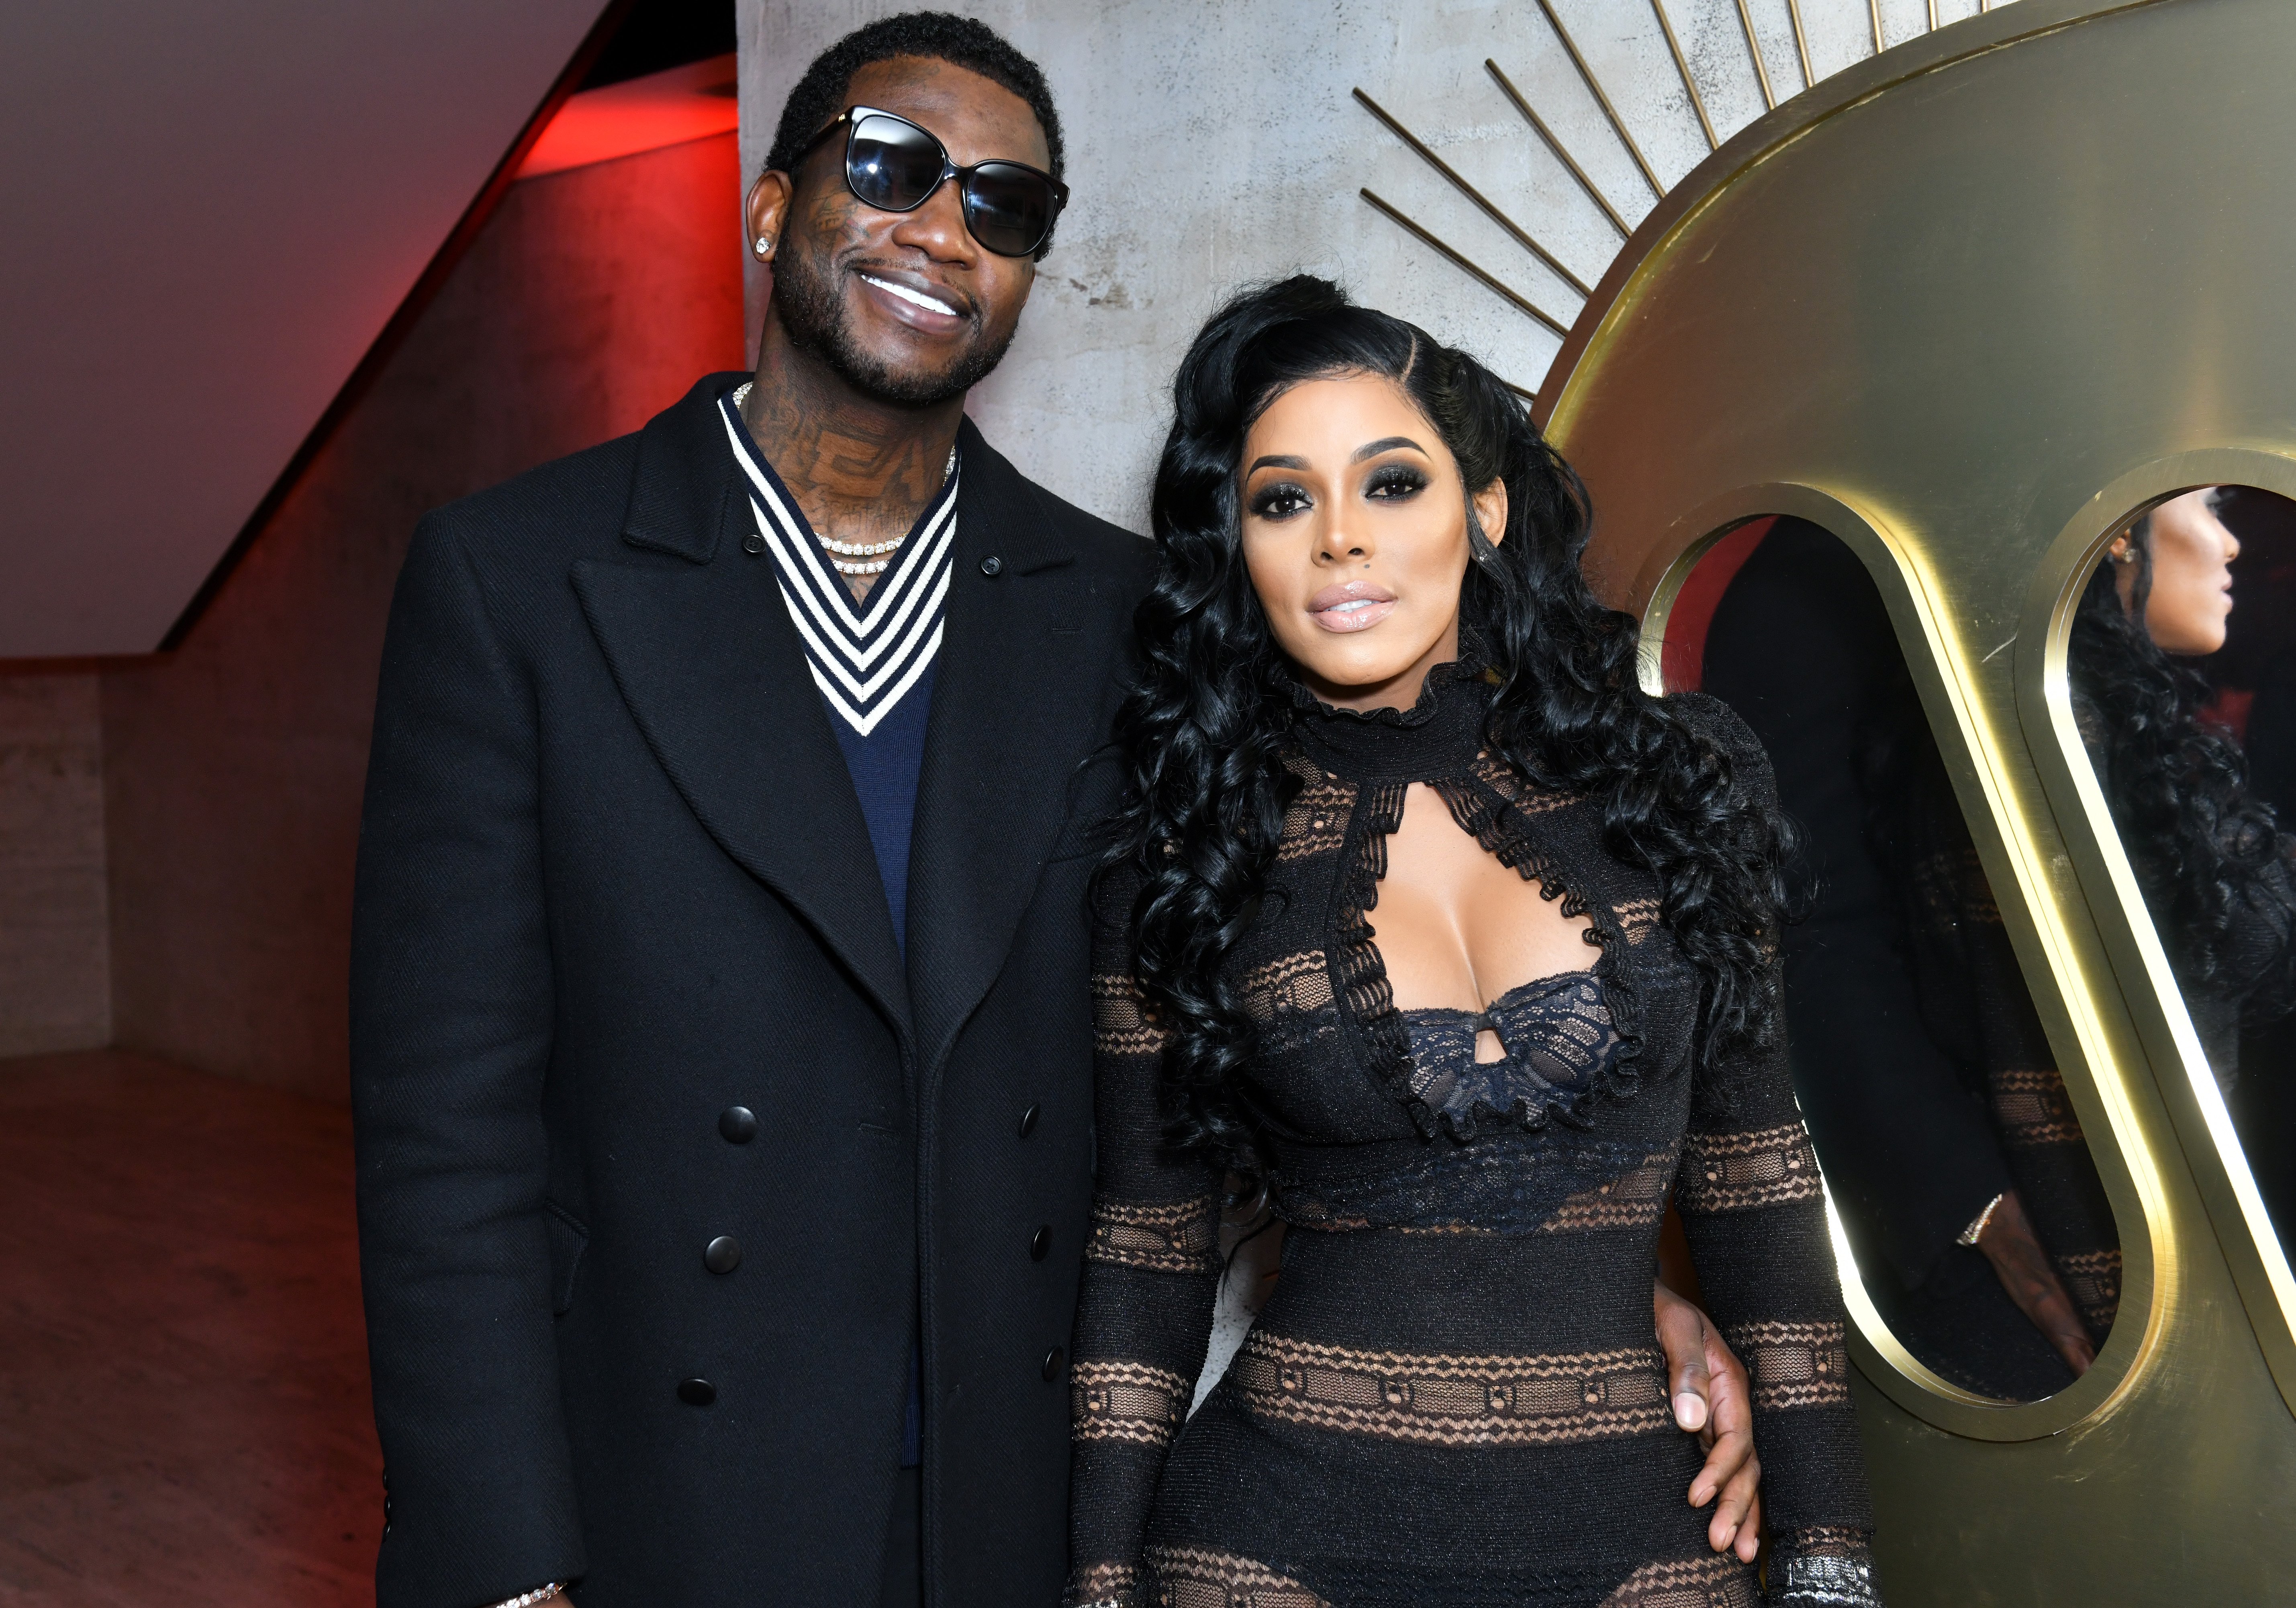 Gucci Mane and Keyshia Ka'oir at the Warner Music Group Pre-Grammy Party on January 25, 2018 in New York City. | Source: Getty Images